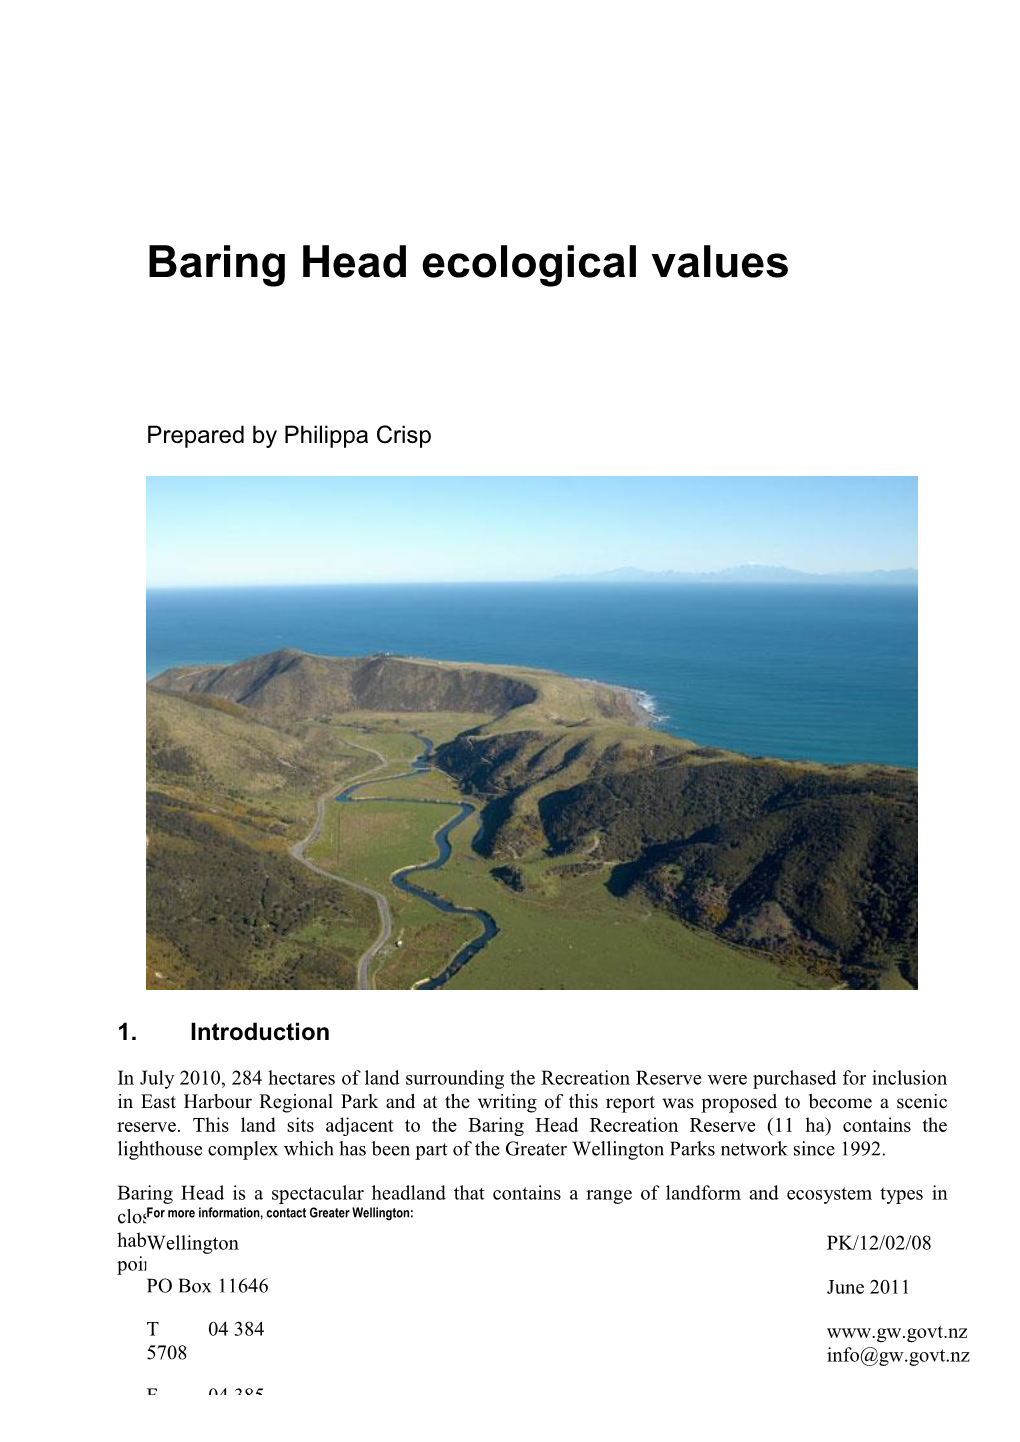 Baring Head Ecological Values